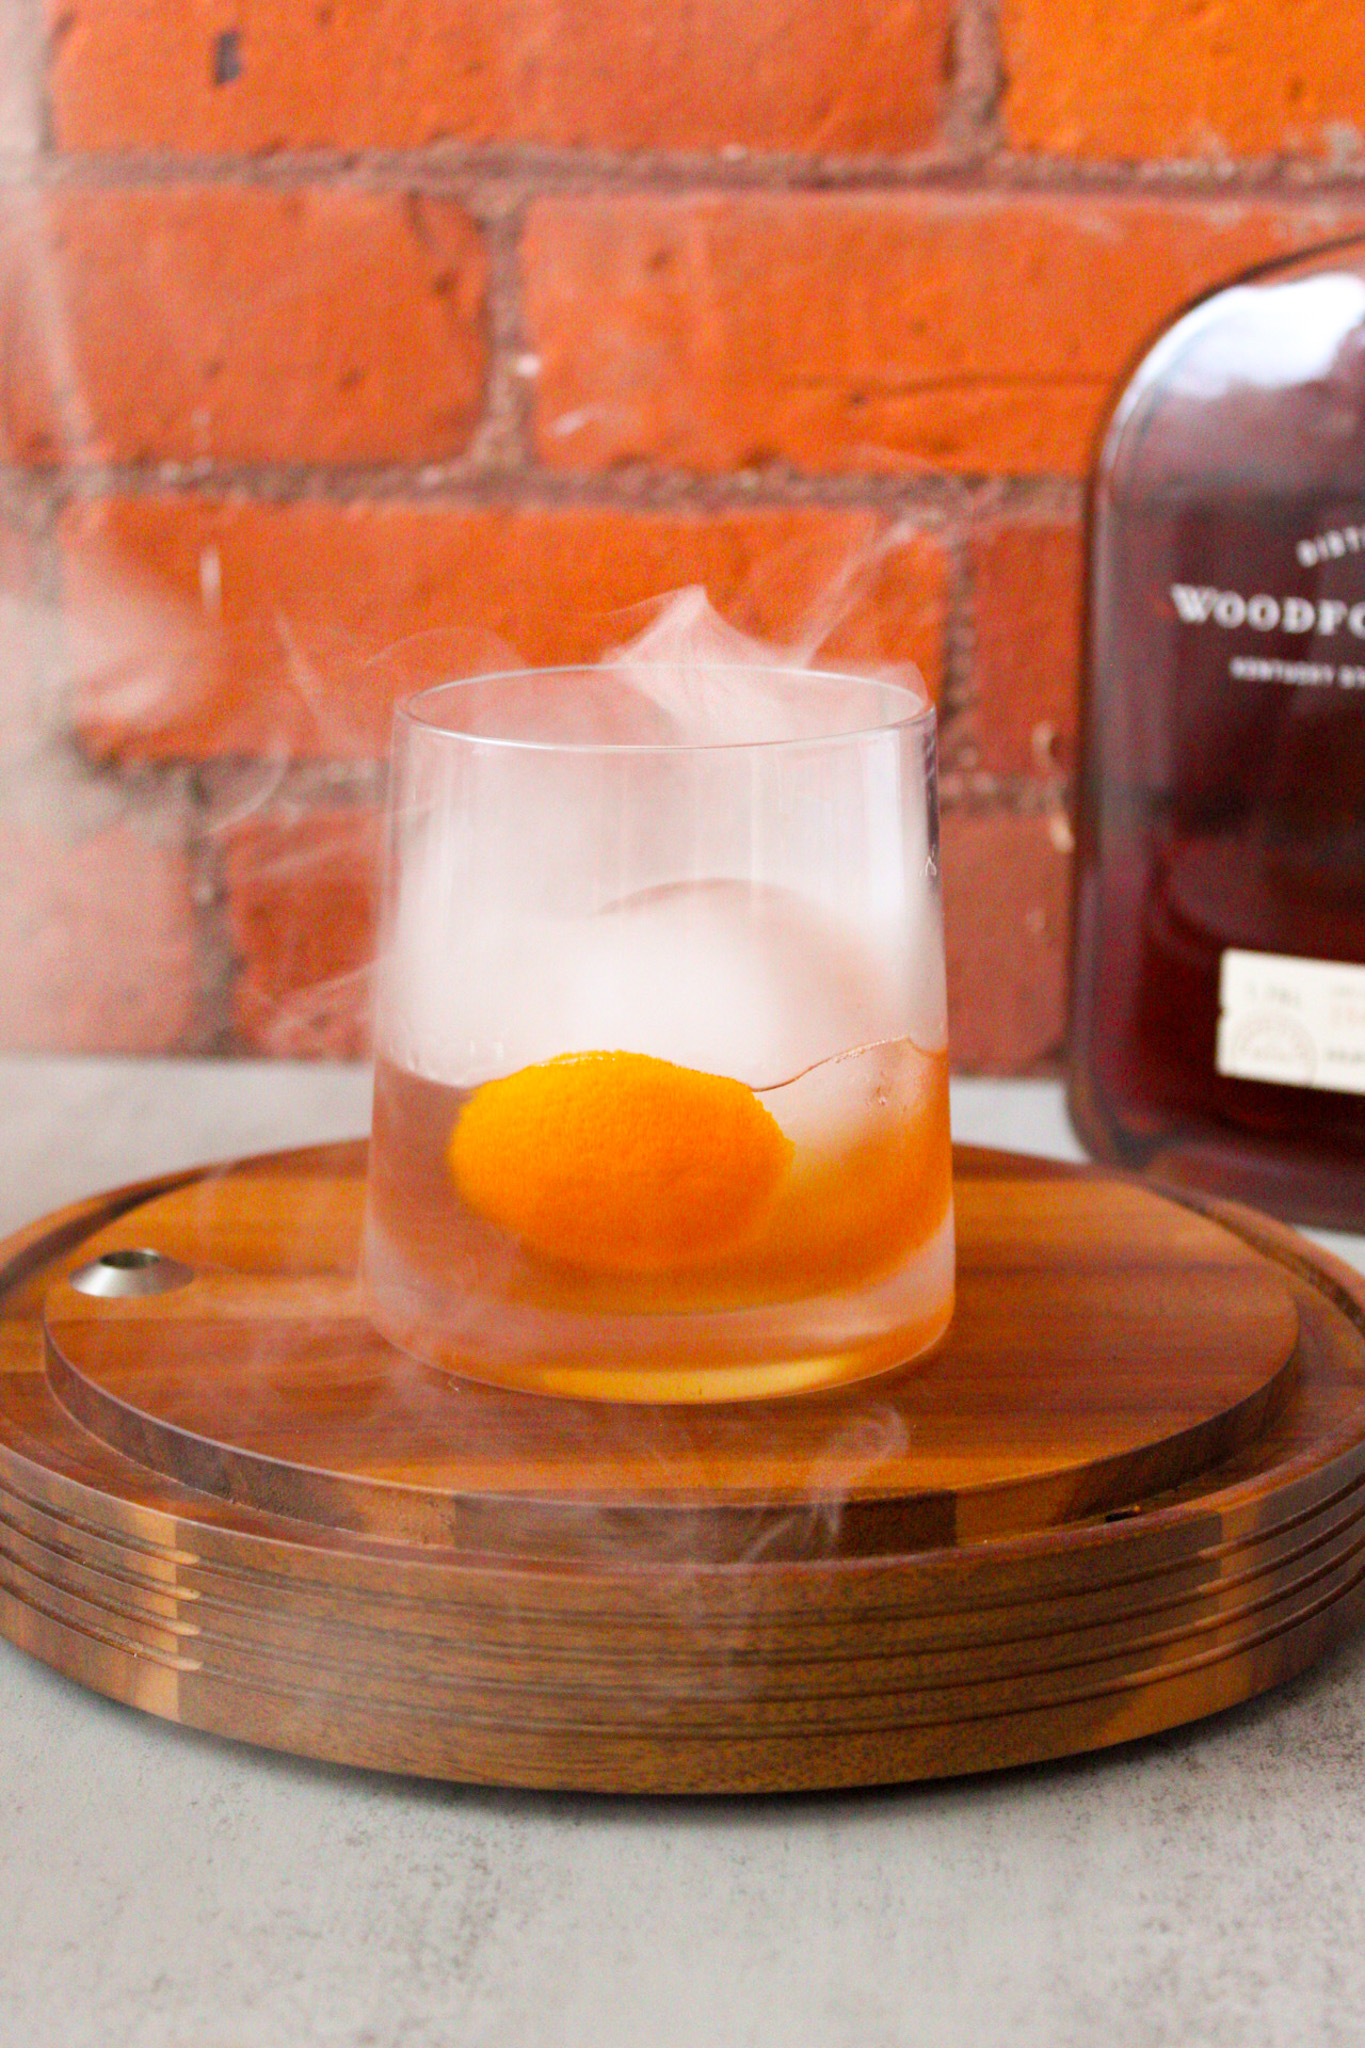 https://www.cuisineandcocktails.com/wp-content/uploads/2019/10/smoked-cocktail.jpg